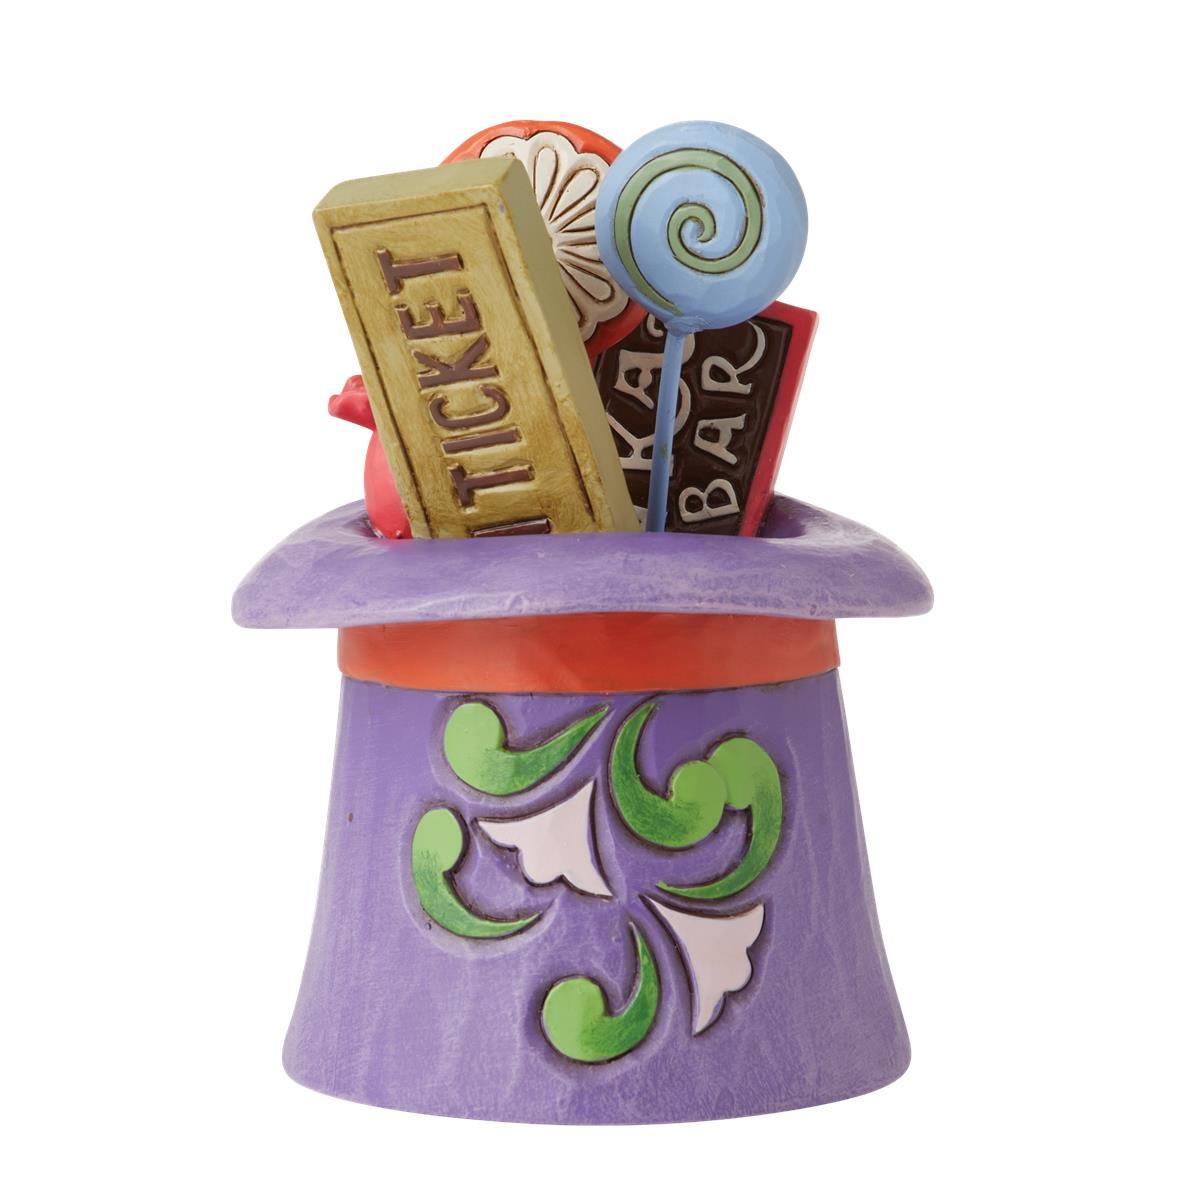 WILLY WONKA BY JIM SHORE MINI WILLY WONKA HAT WITH ICONS